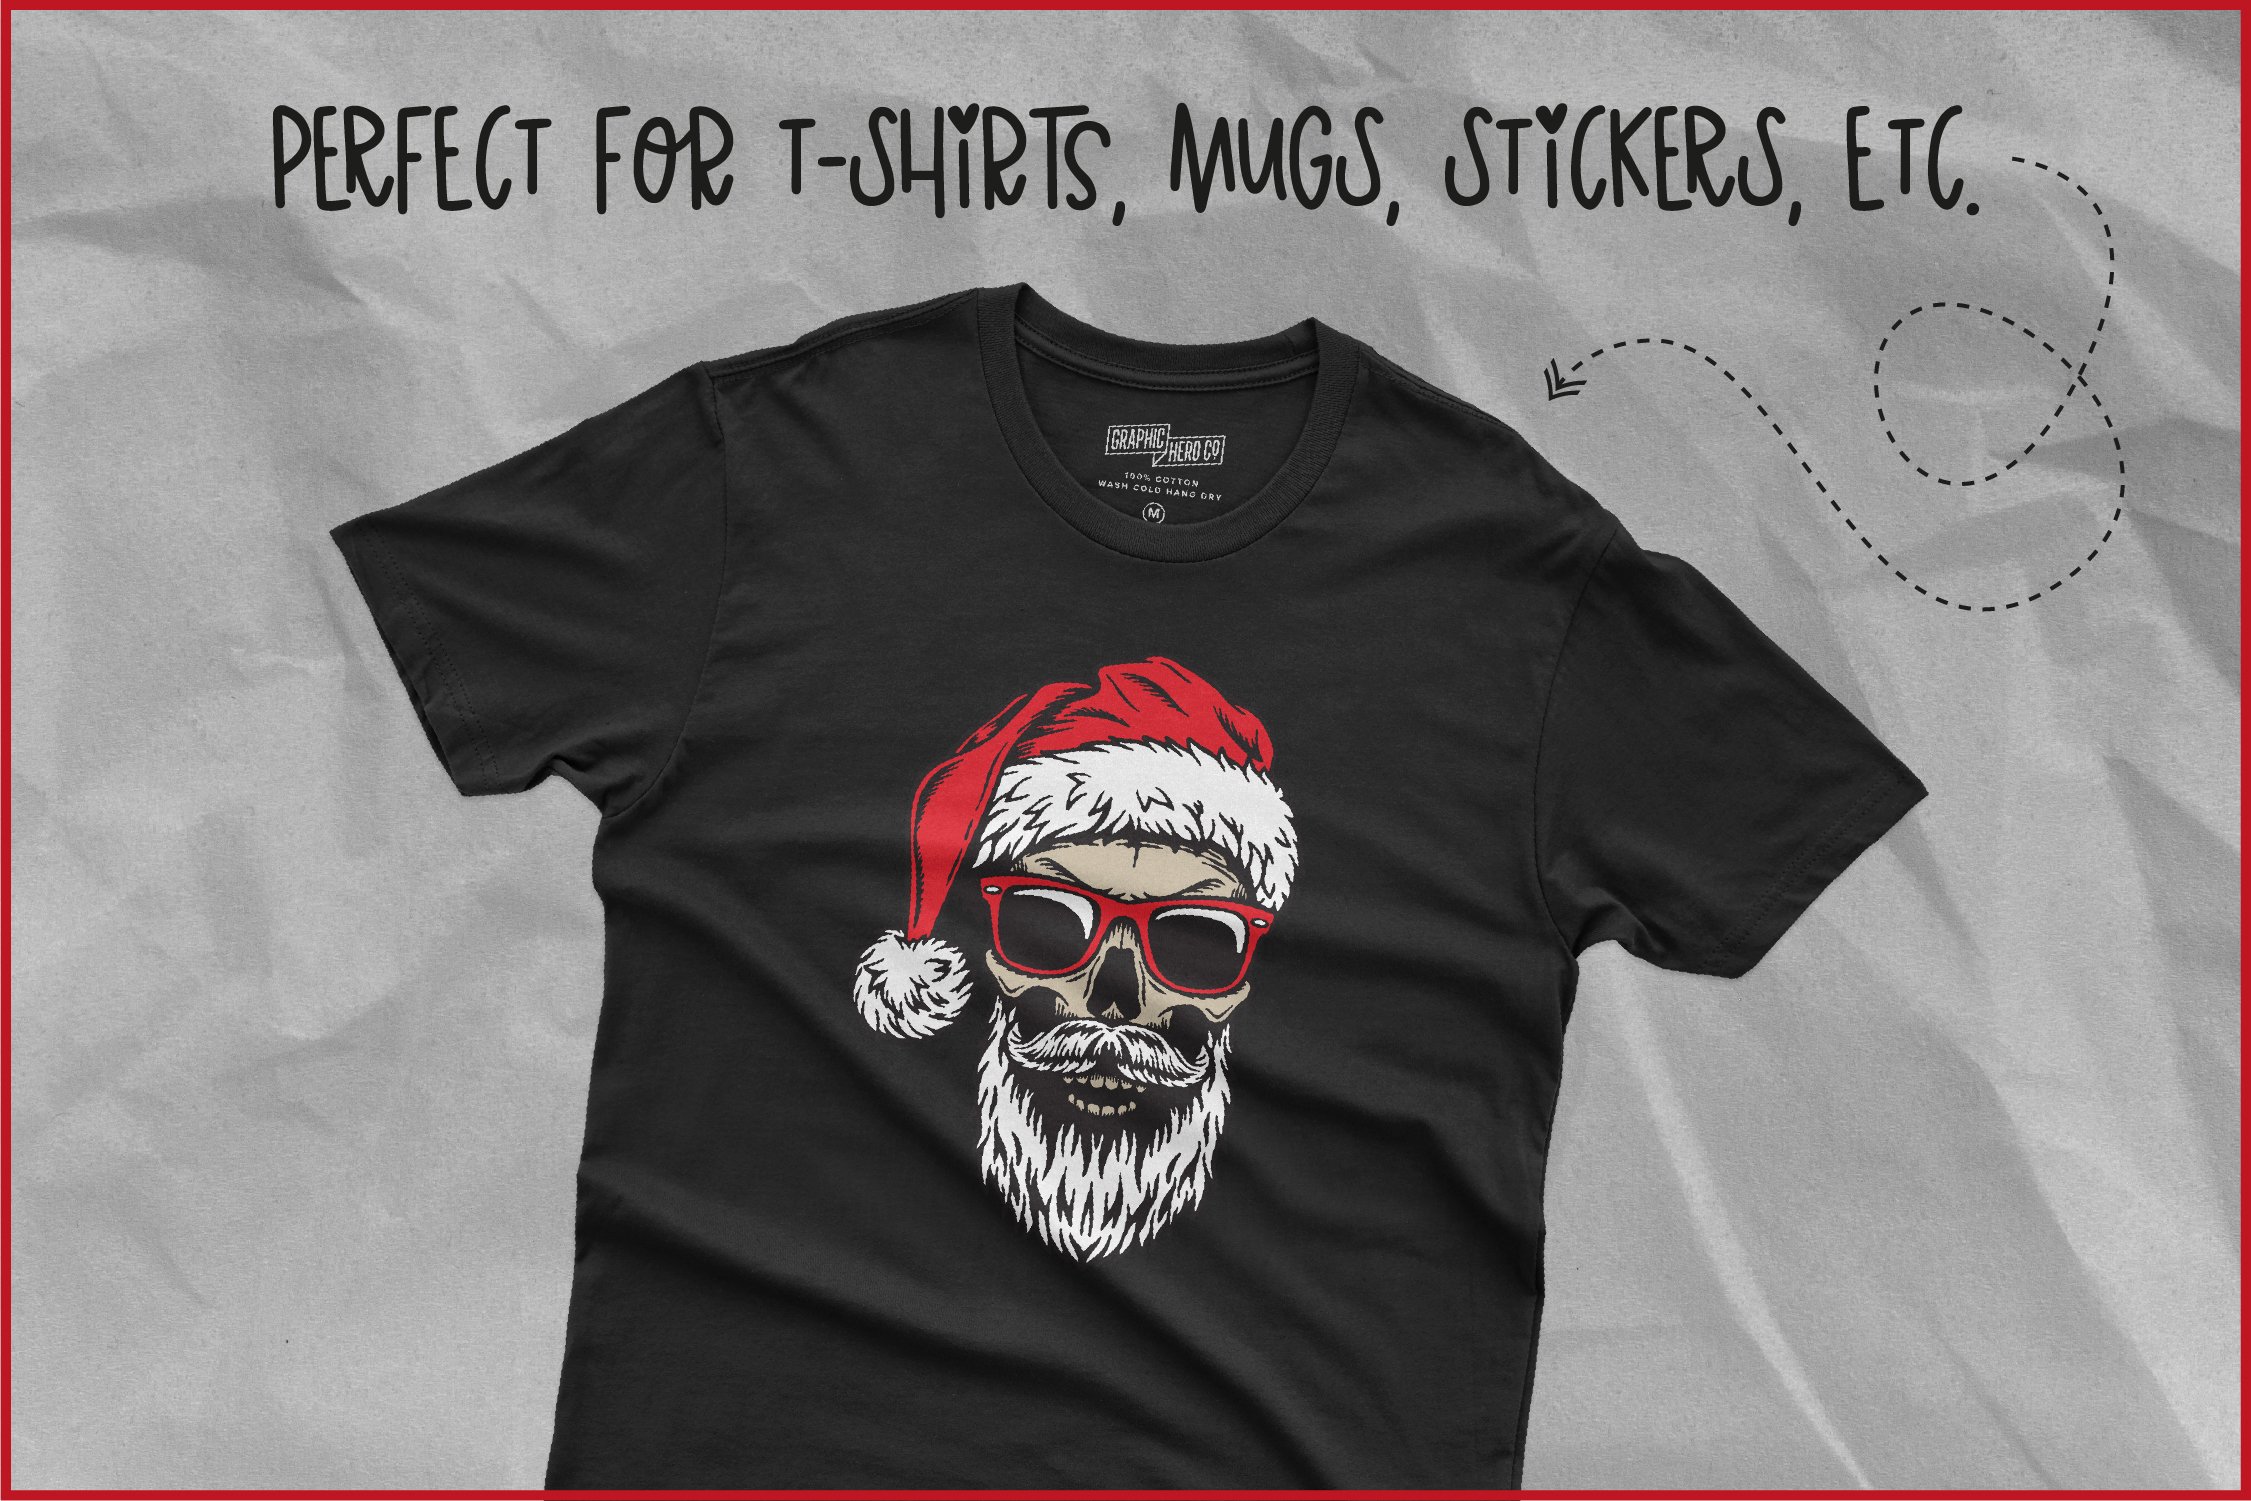 Black t-shirt with images of disgusting santa's head.